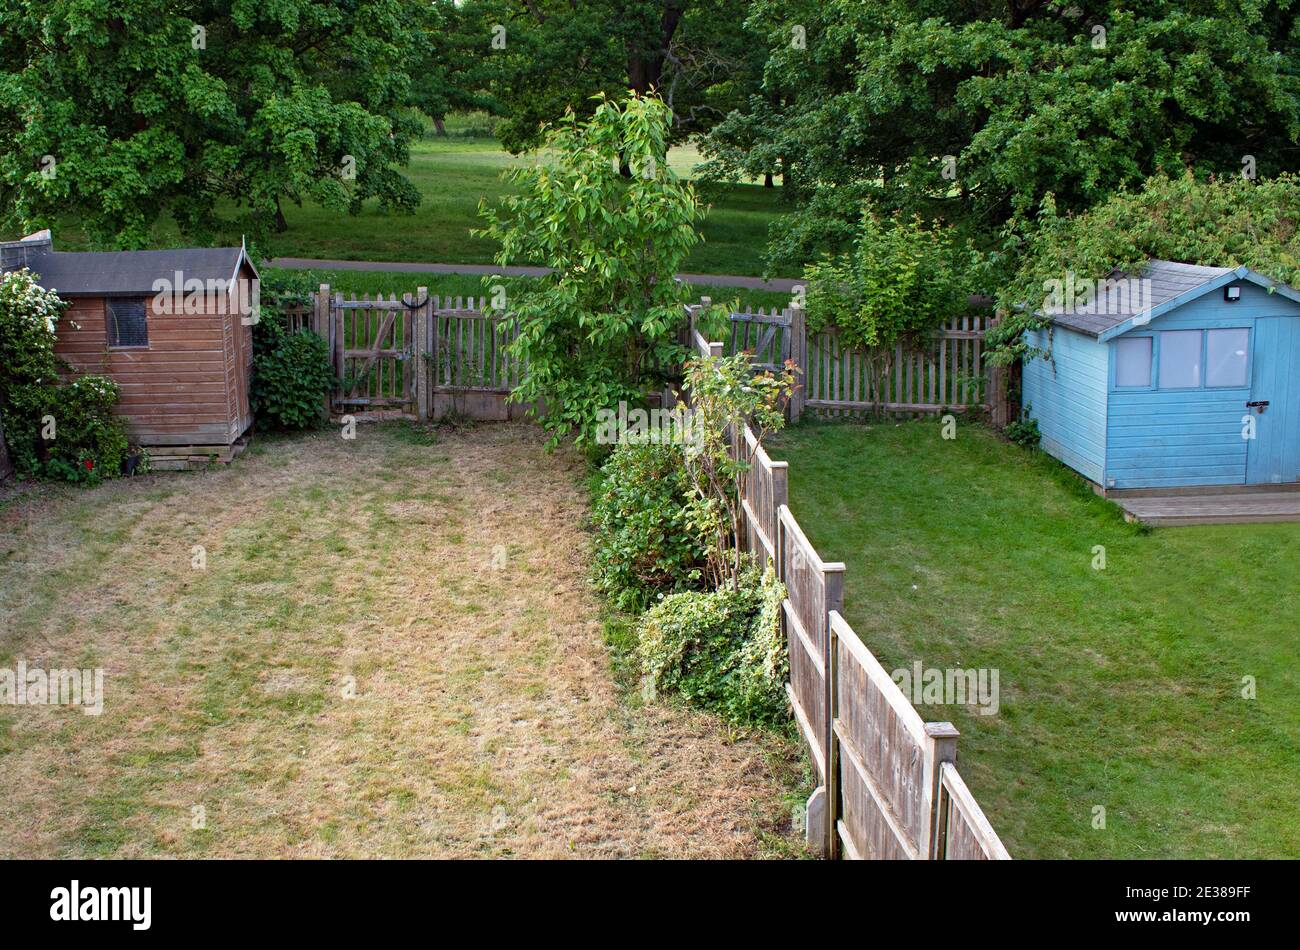 The grass is always greener on the other side - two neighboring gardens, one with fresh and lush green grass, the other with dried out yellow grass Stock Photo